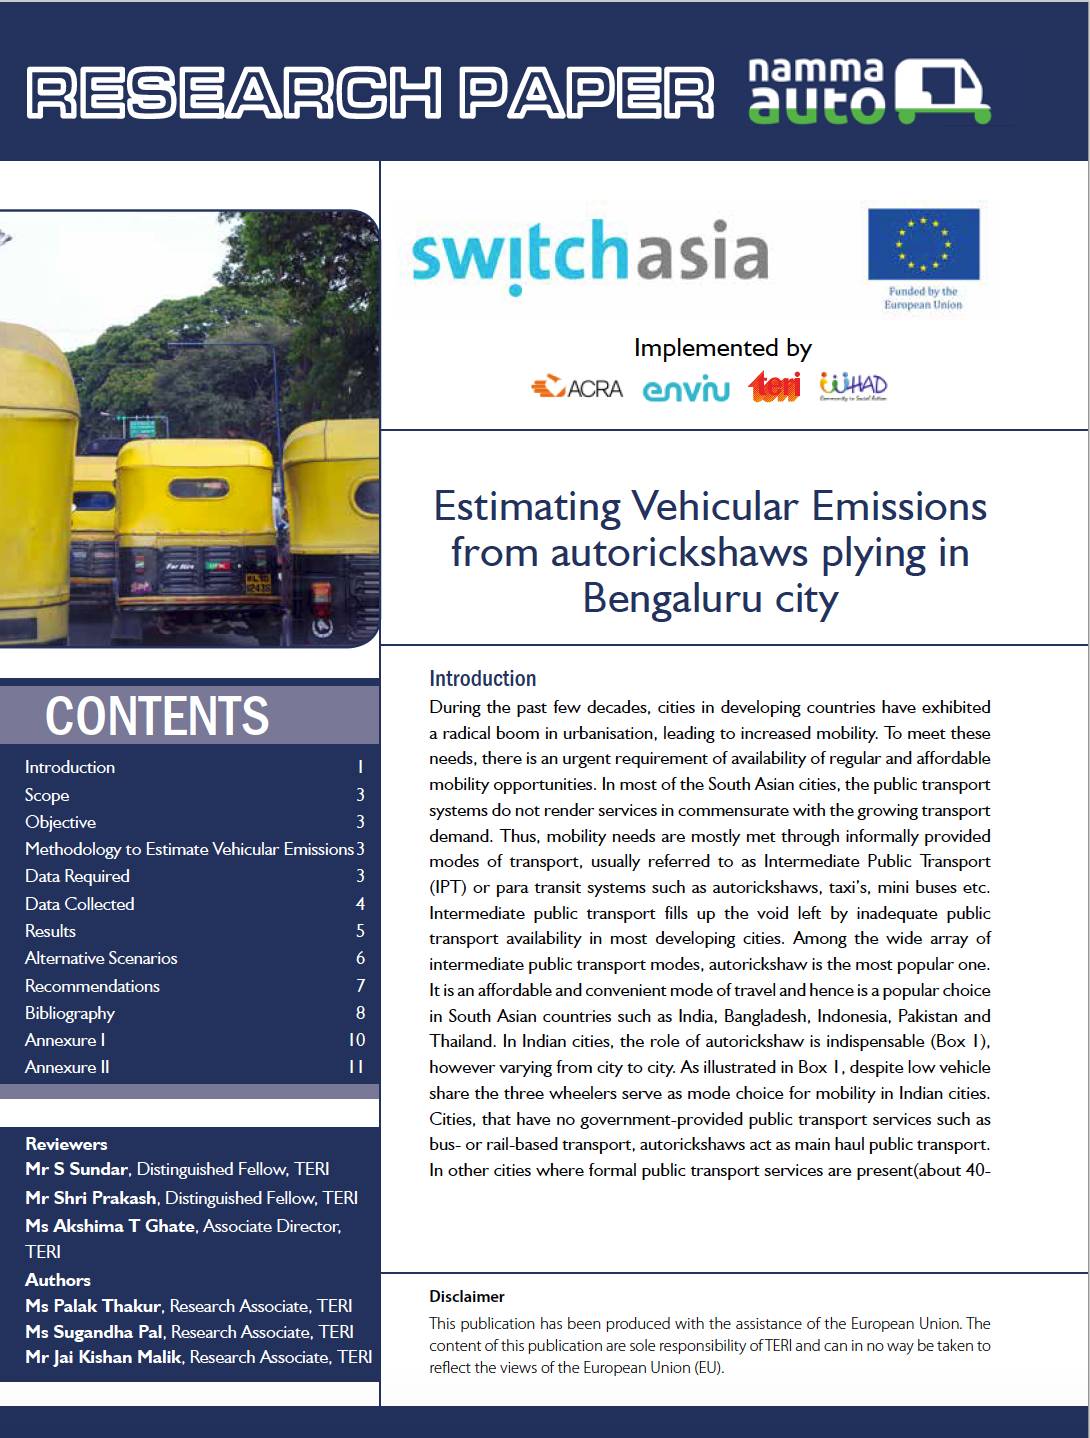 Research: Estimating Vehicular Emissions from autorickshaws plying in Bengaluru city